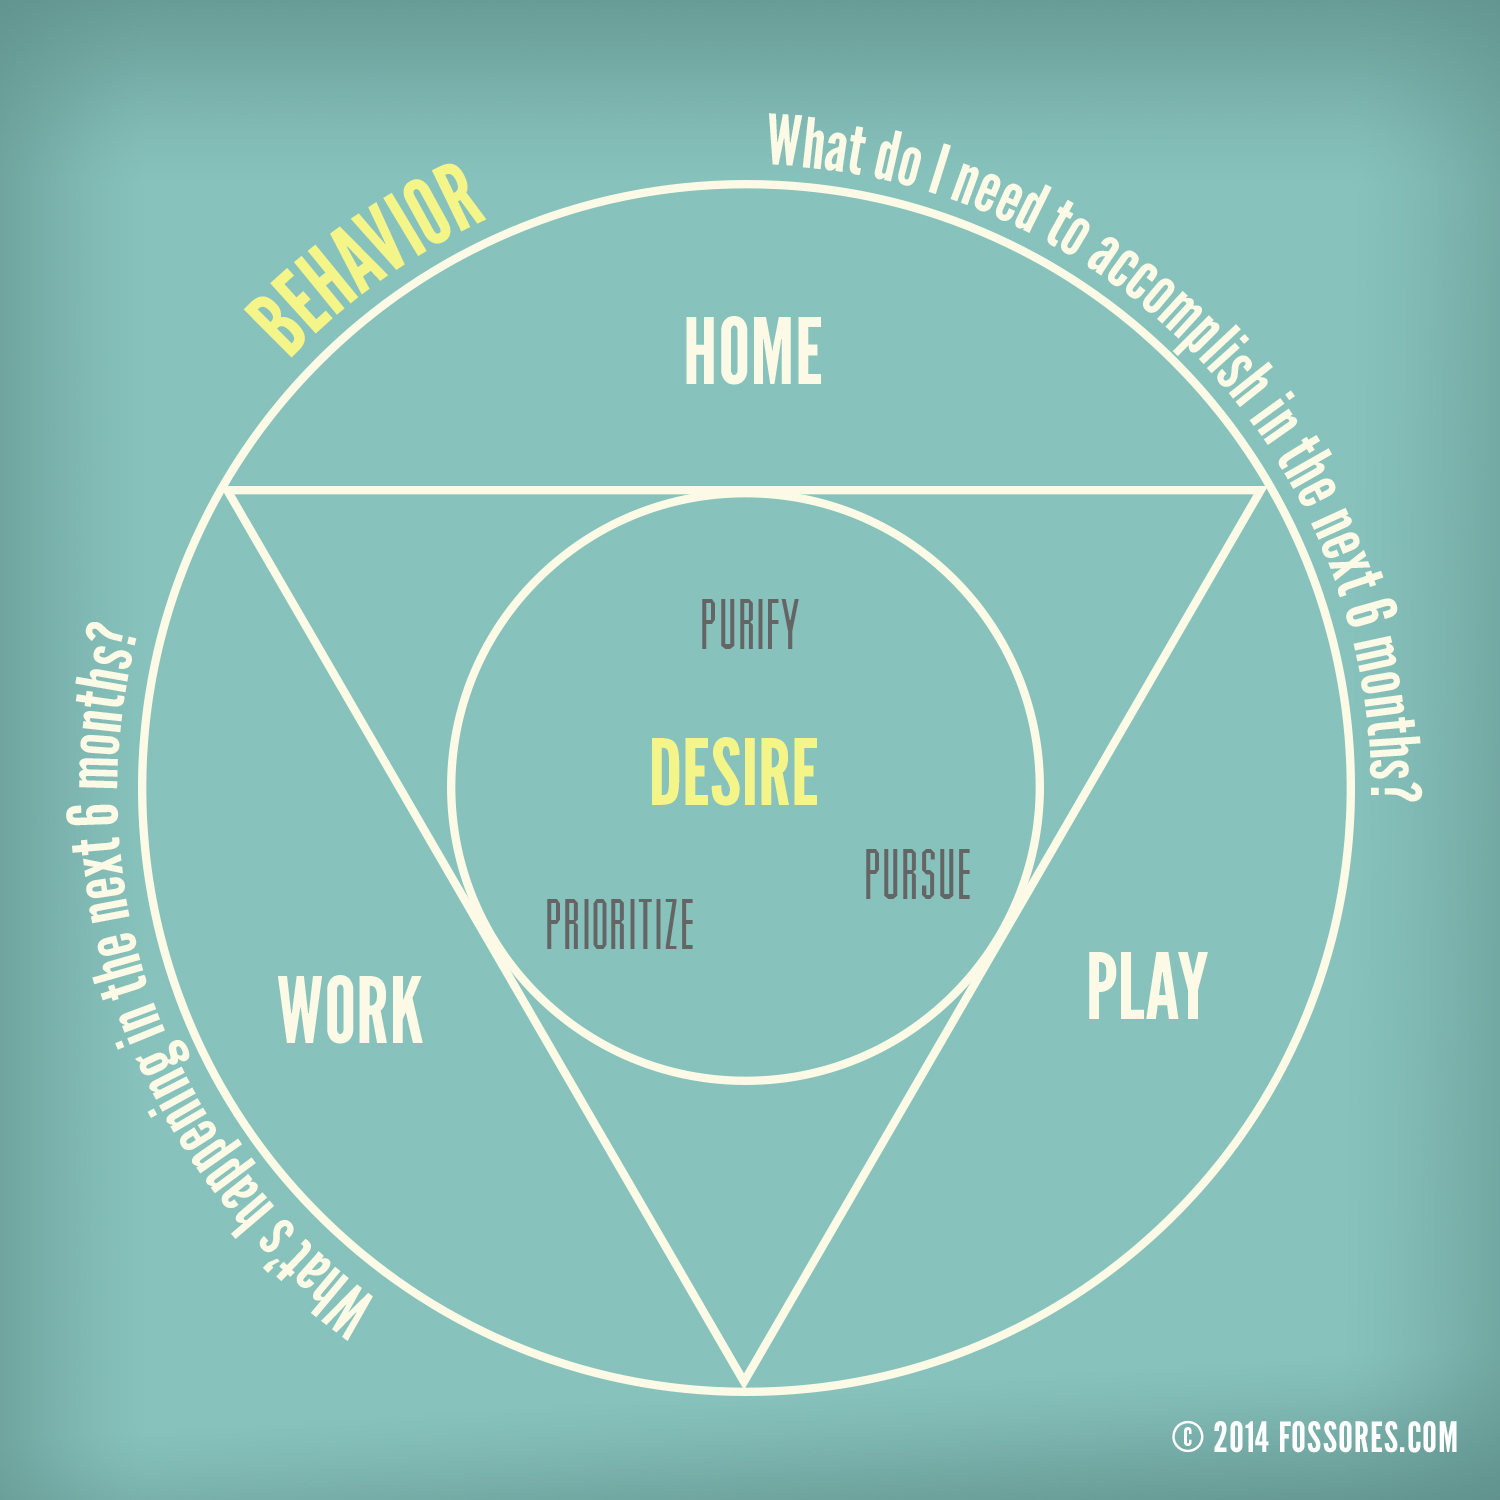 DESIRE IS THE COMPASS OF VOCATION